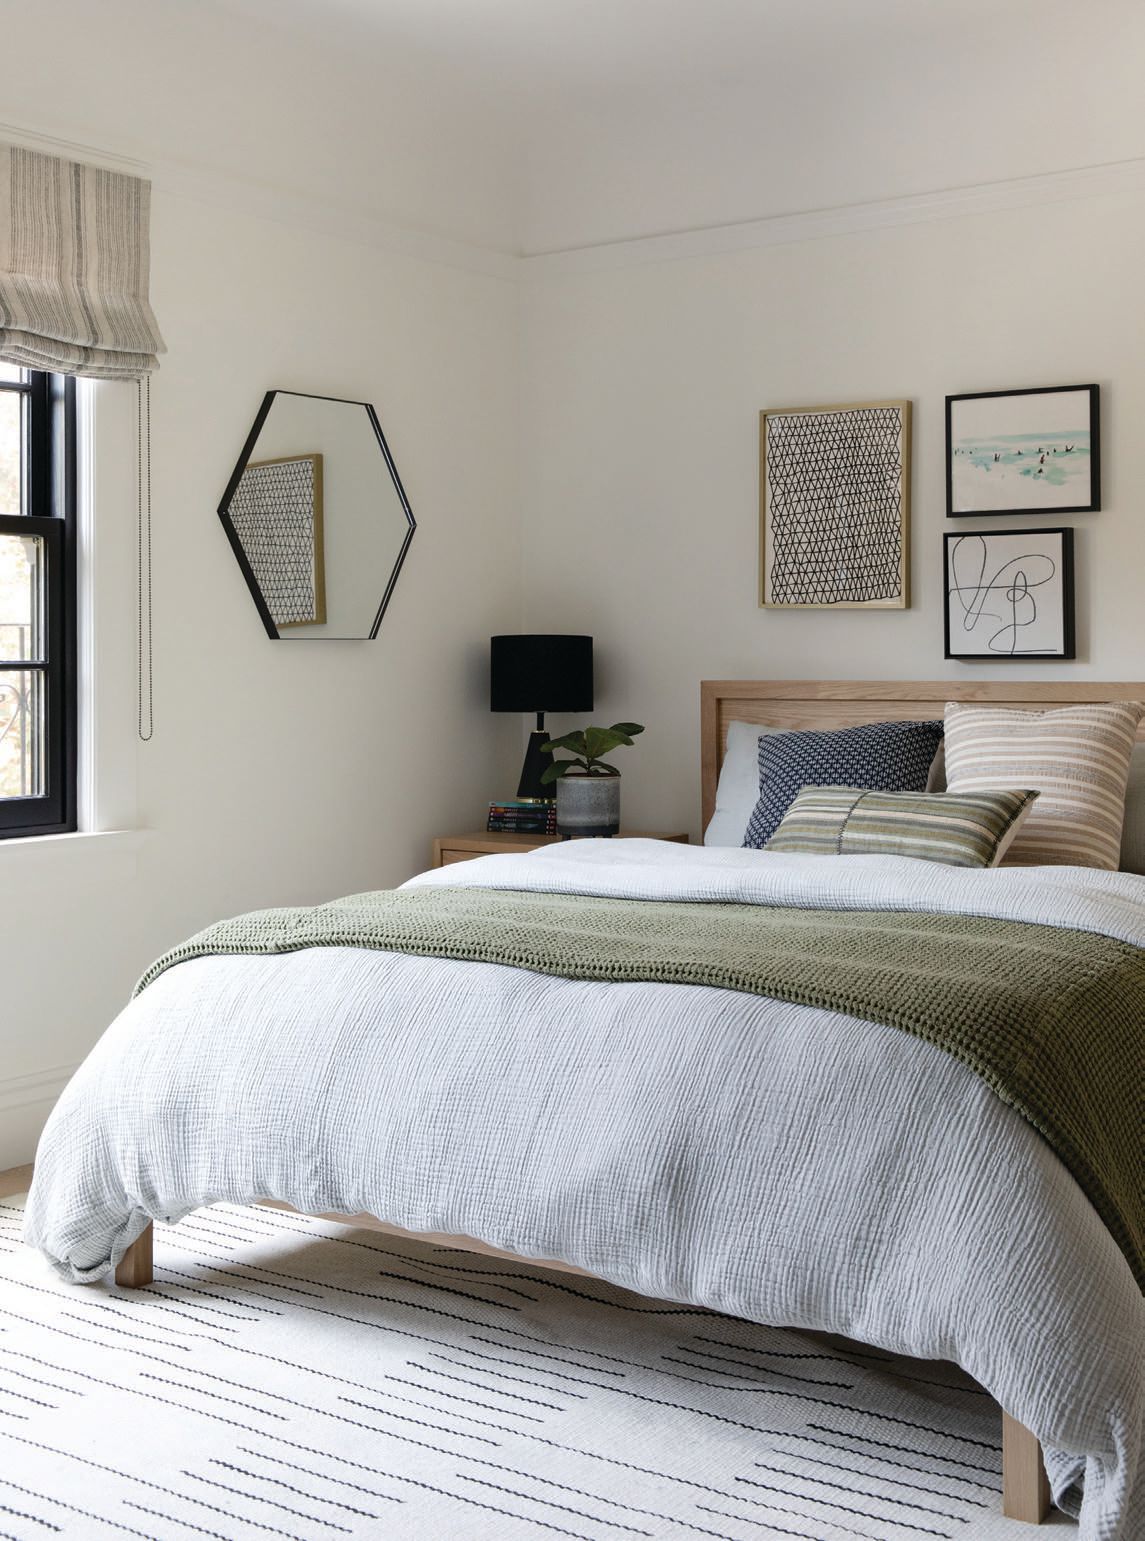 The boy’s room plays with pattern on pattern and textured luxury linen bedding